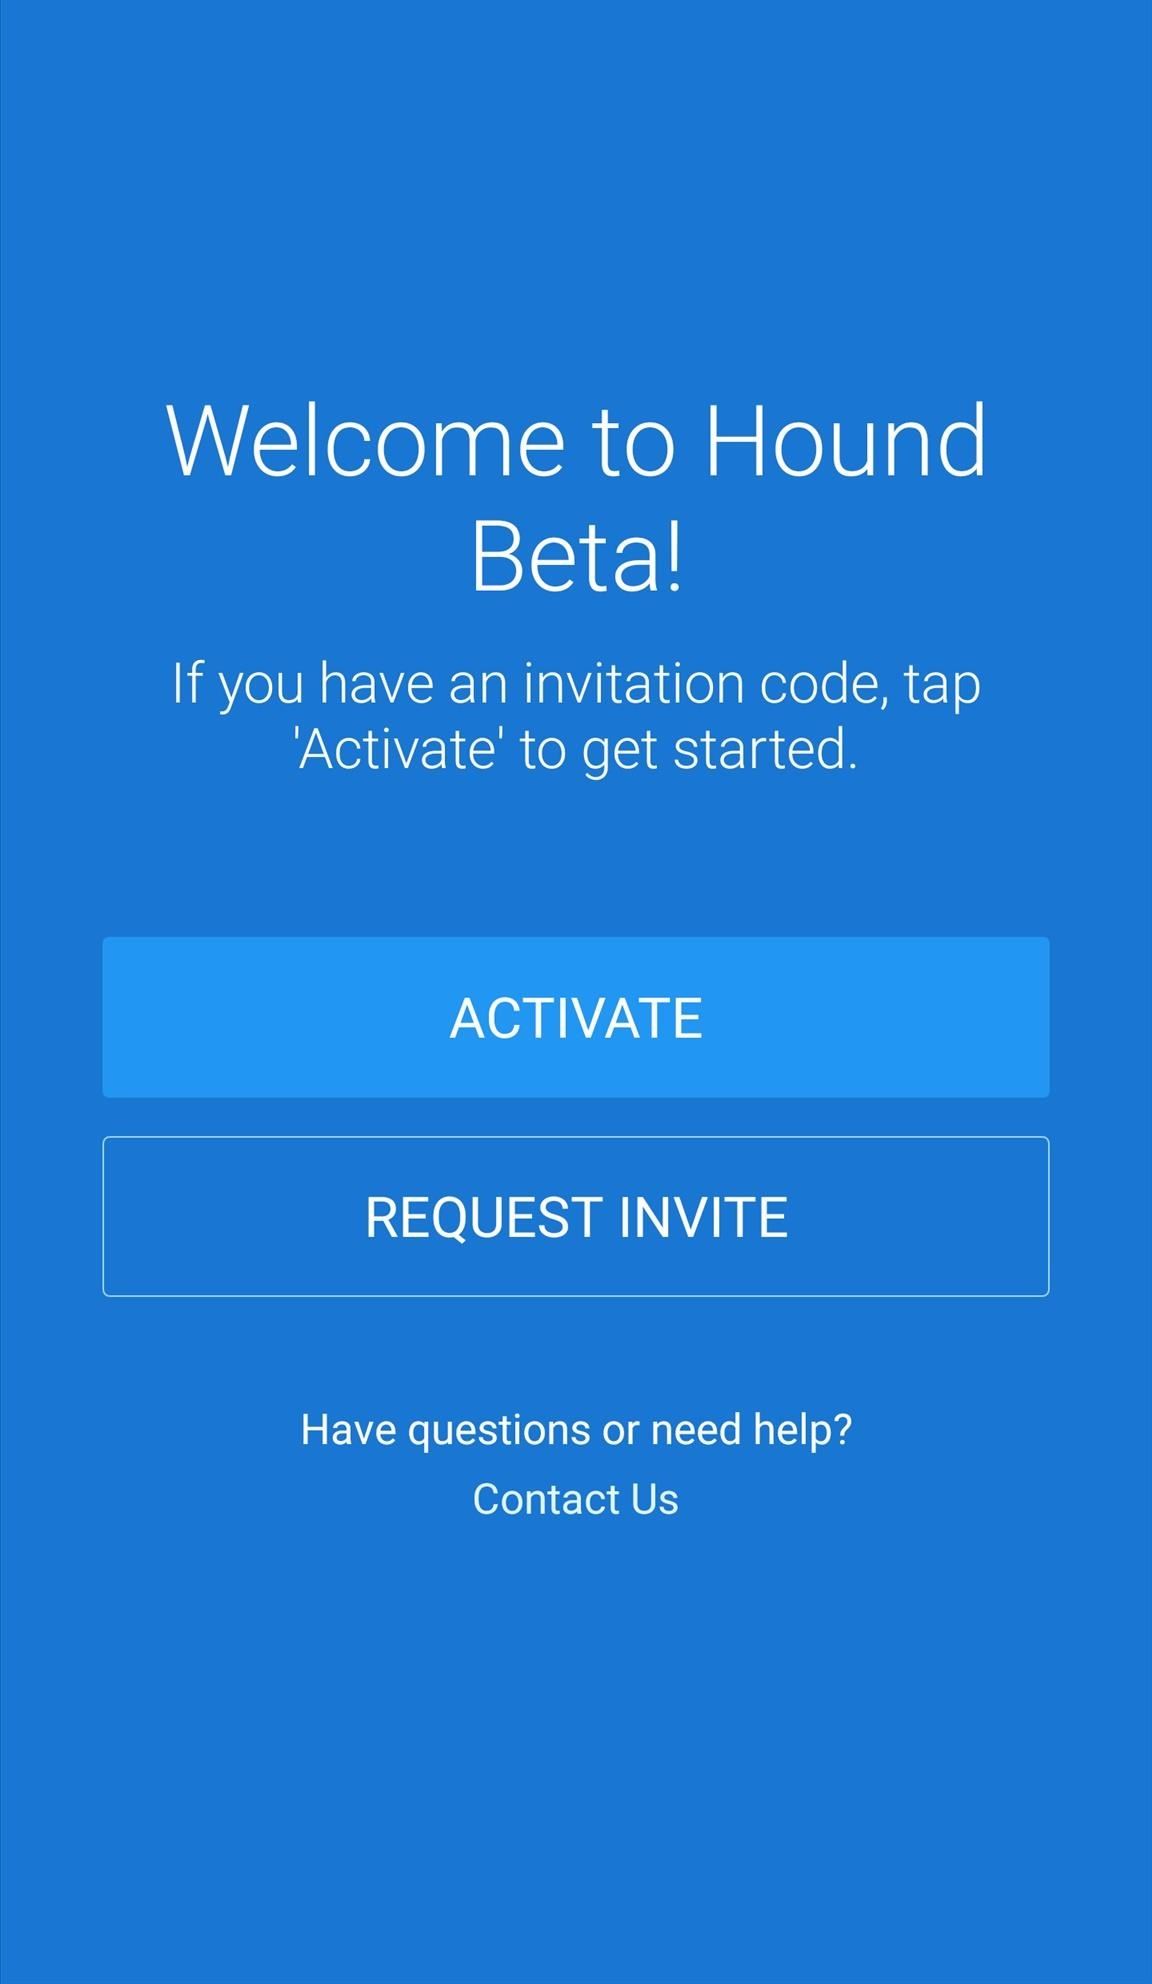 How to Use Hound on Android Without an Activation Code